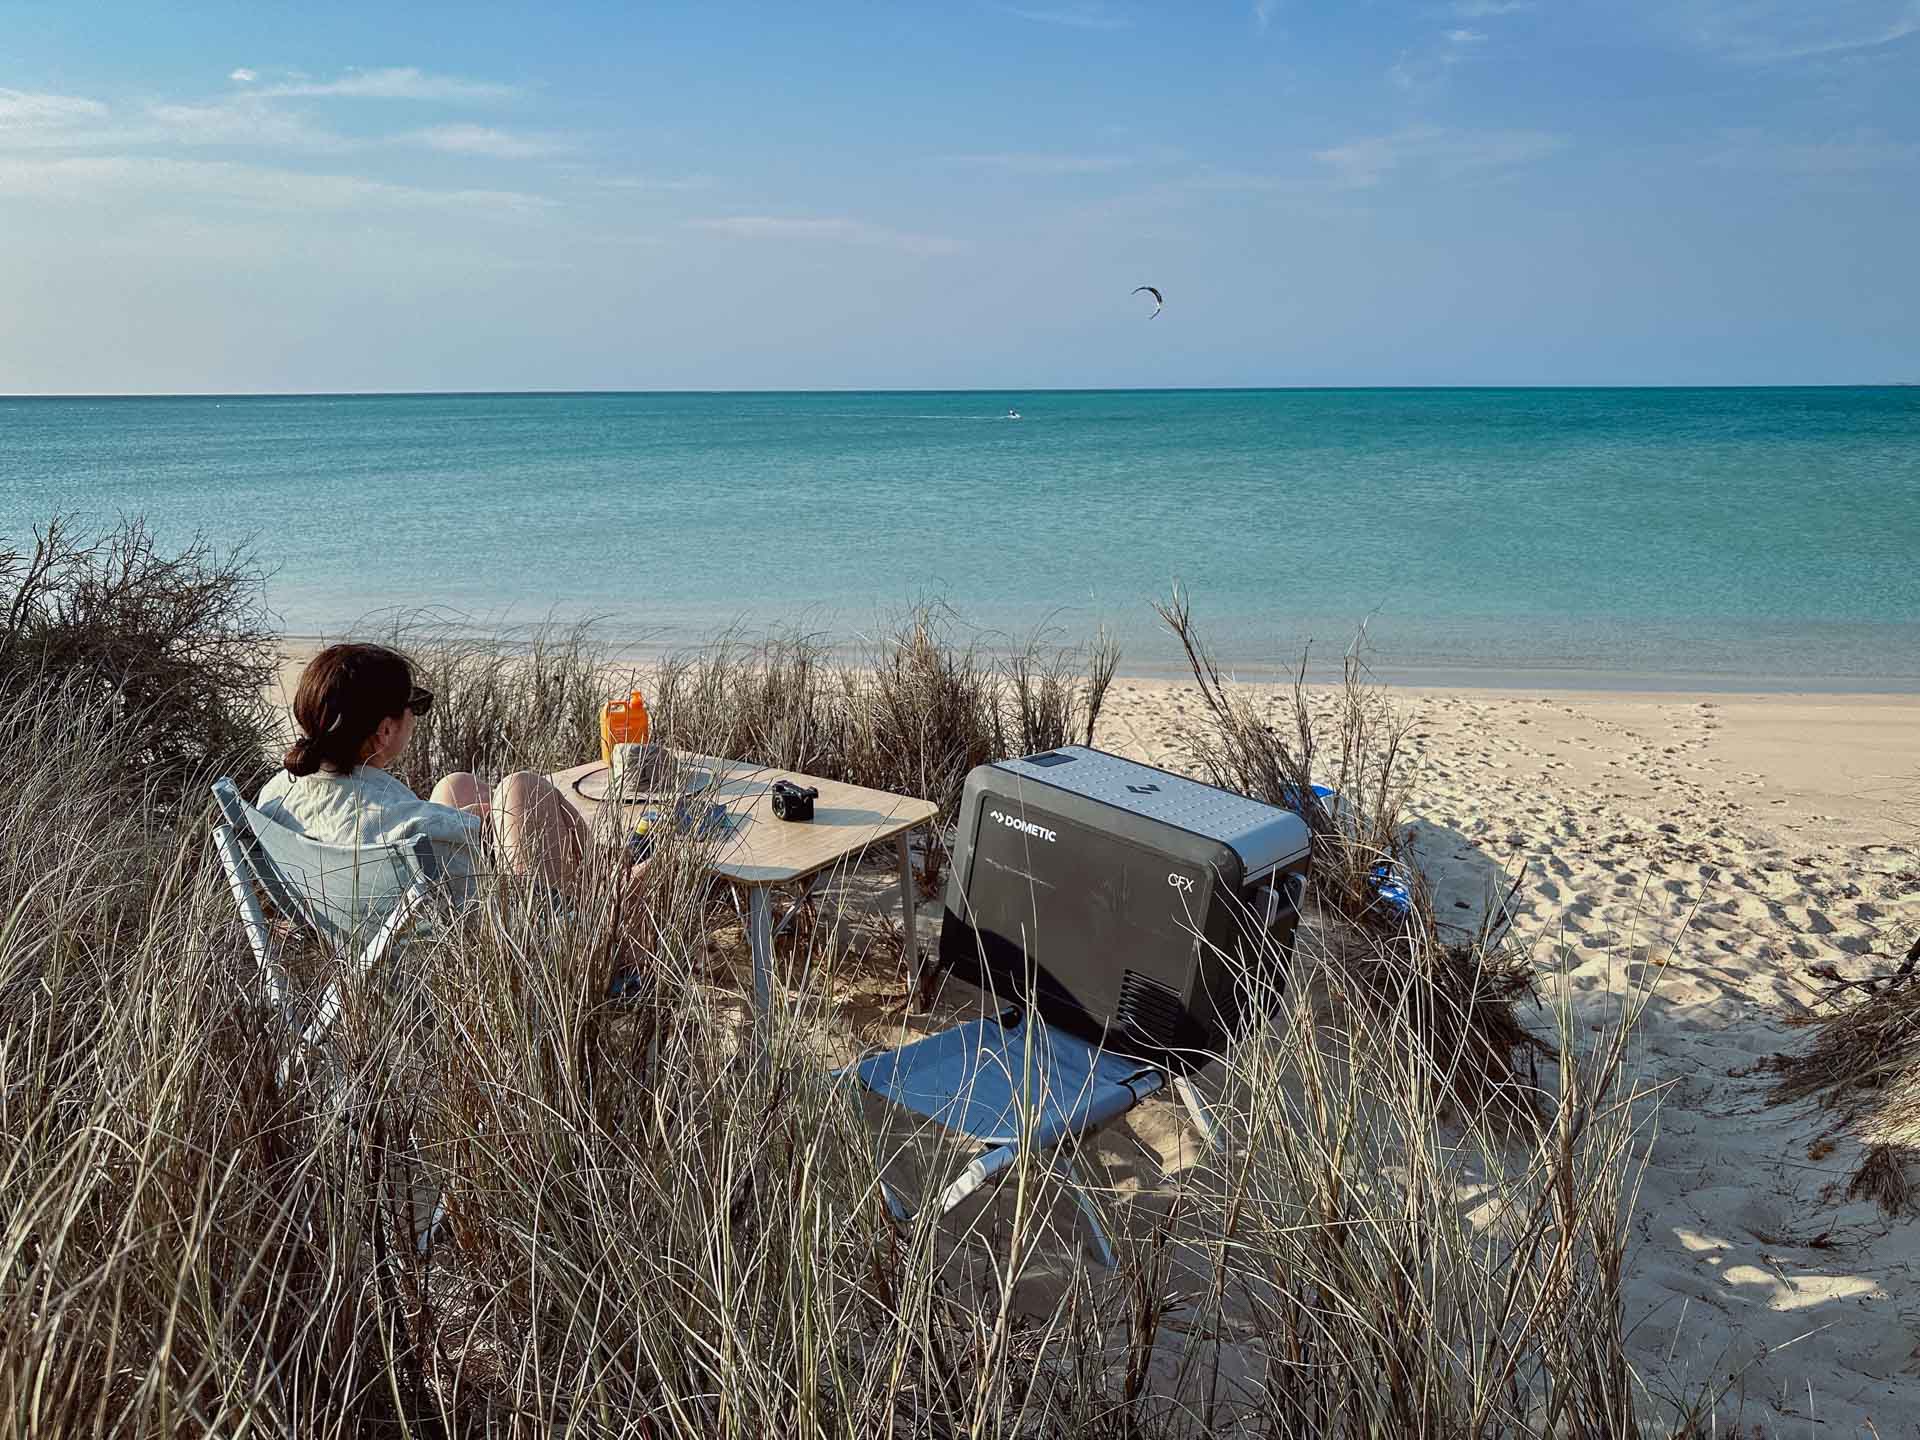 How a Dometic Fridge/Freezer Will Take Your Camping Set Up to the Next Level, gear, dometic, sponsored, beach picnic, lady having a picnic on the beach with a dometic freezer fridge